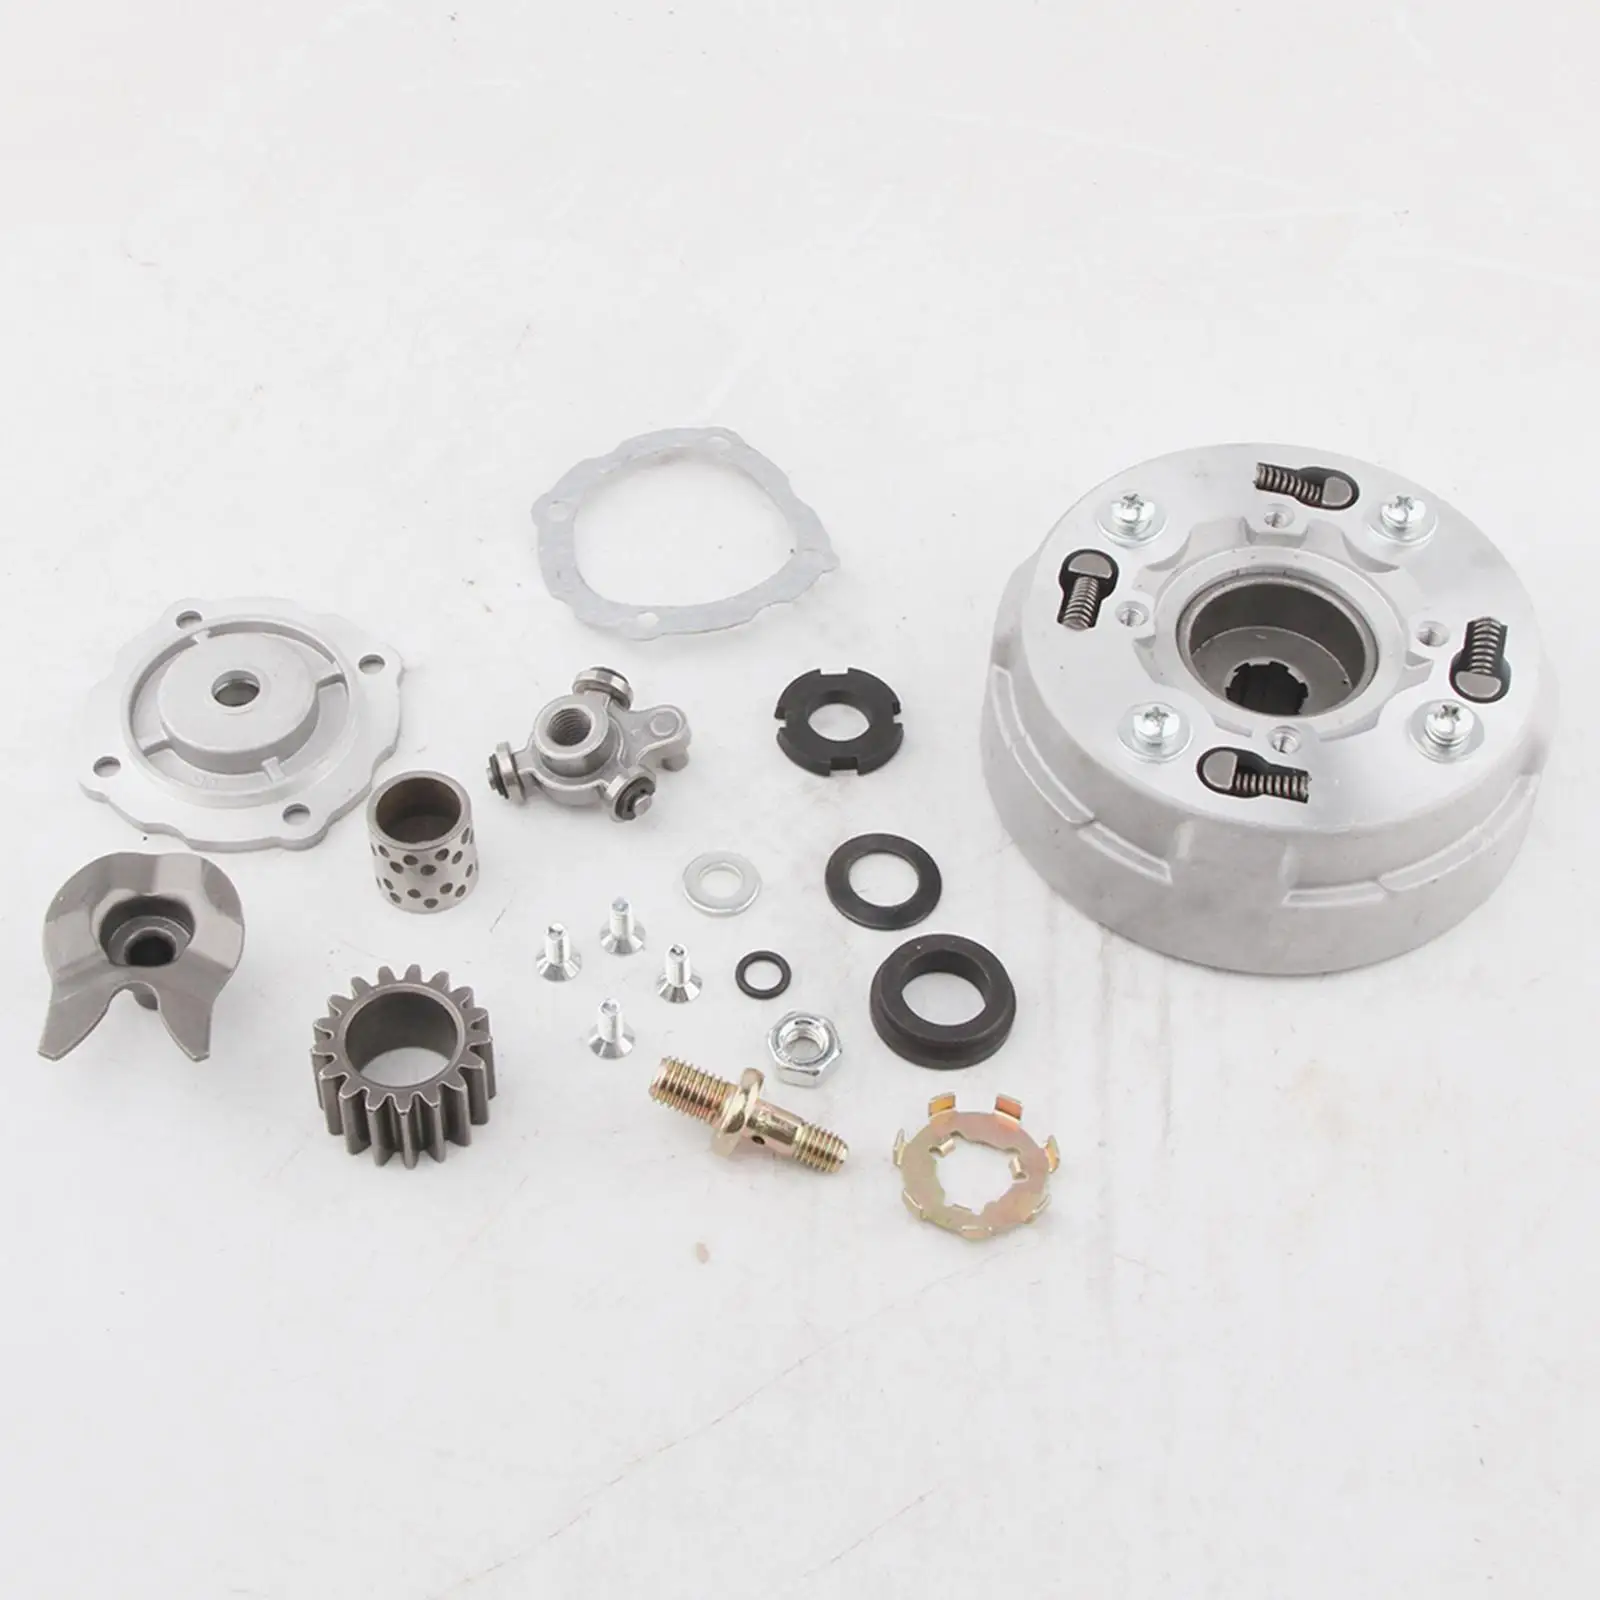 Semi Clutch  Assembly Kits for 90cc Chinese ATV, Dirt Bikes, Buggies